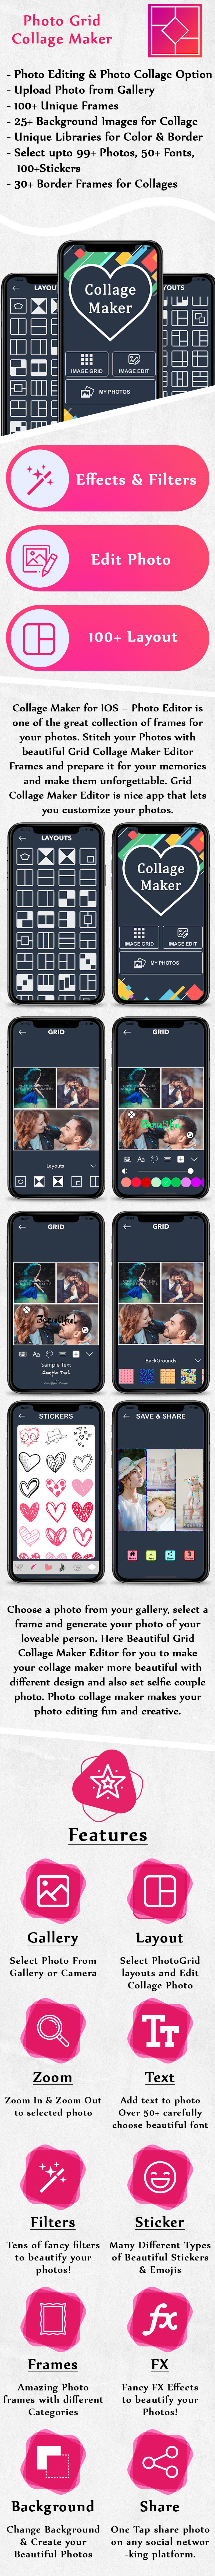 Collage Maker for IOS - Photo Editor (SWIFT) - 3